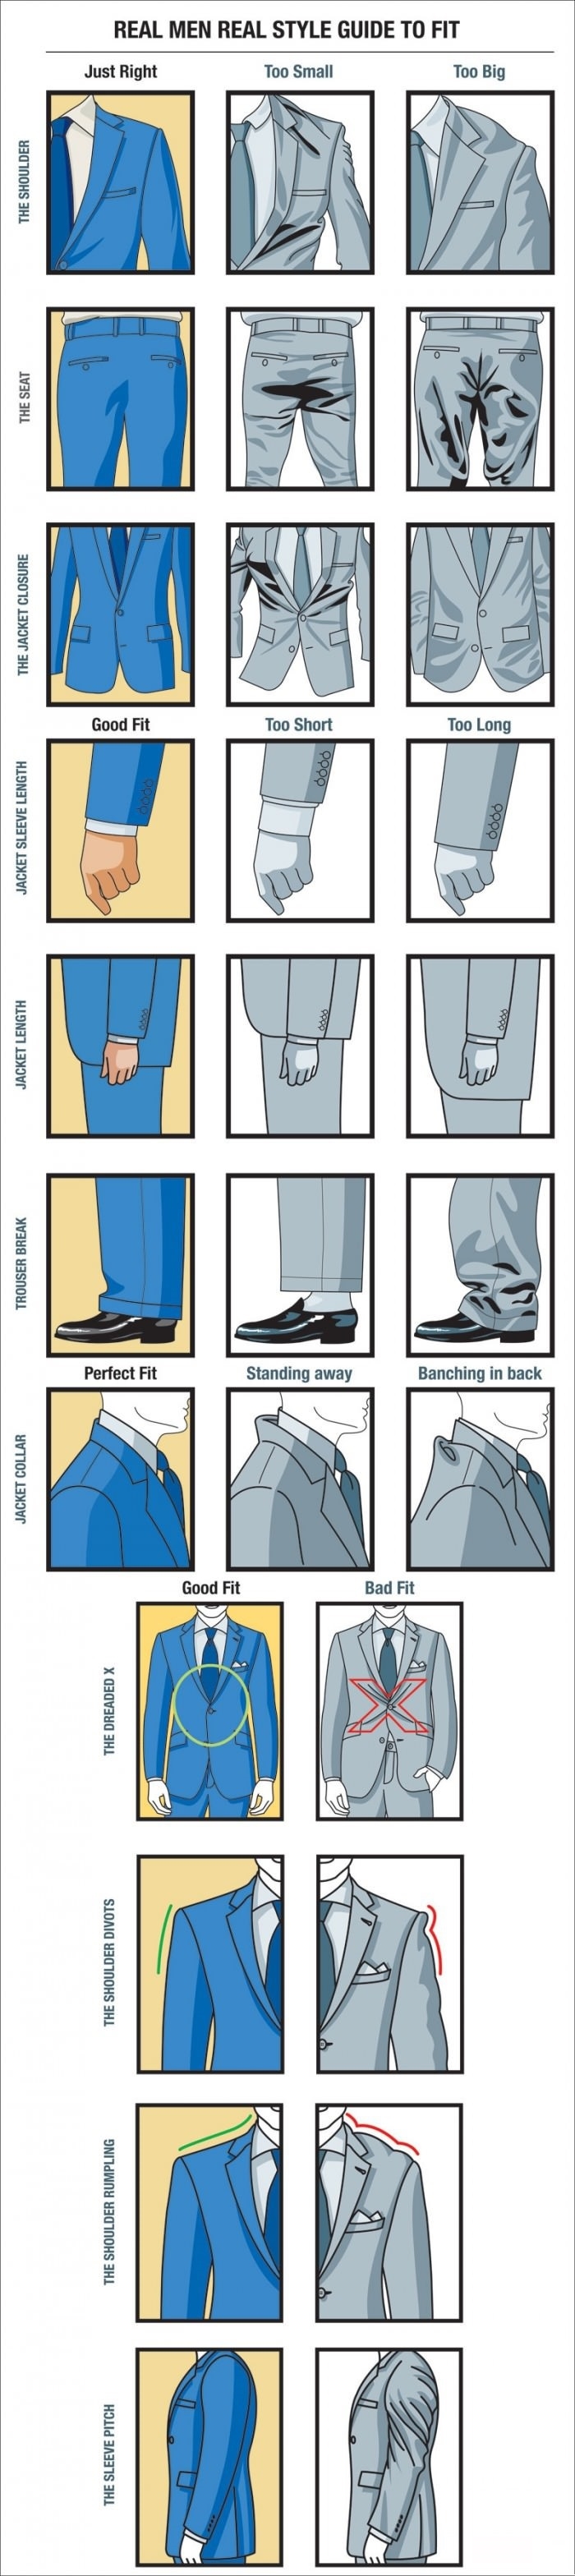 Men's style guide